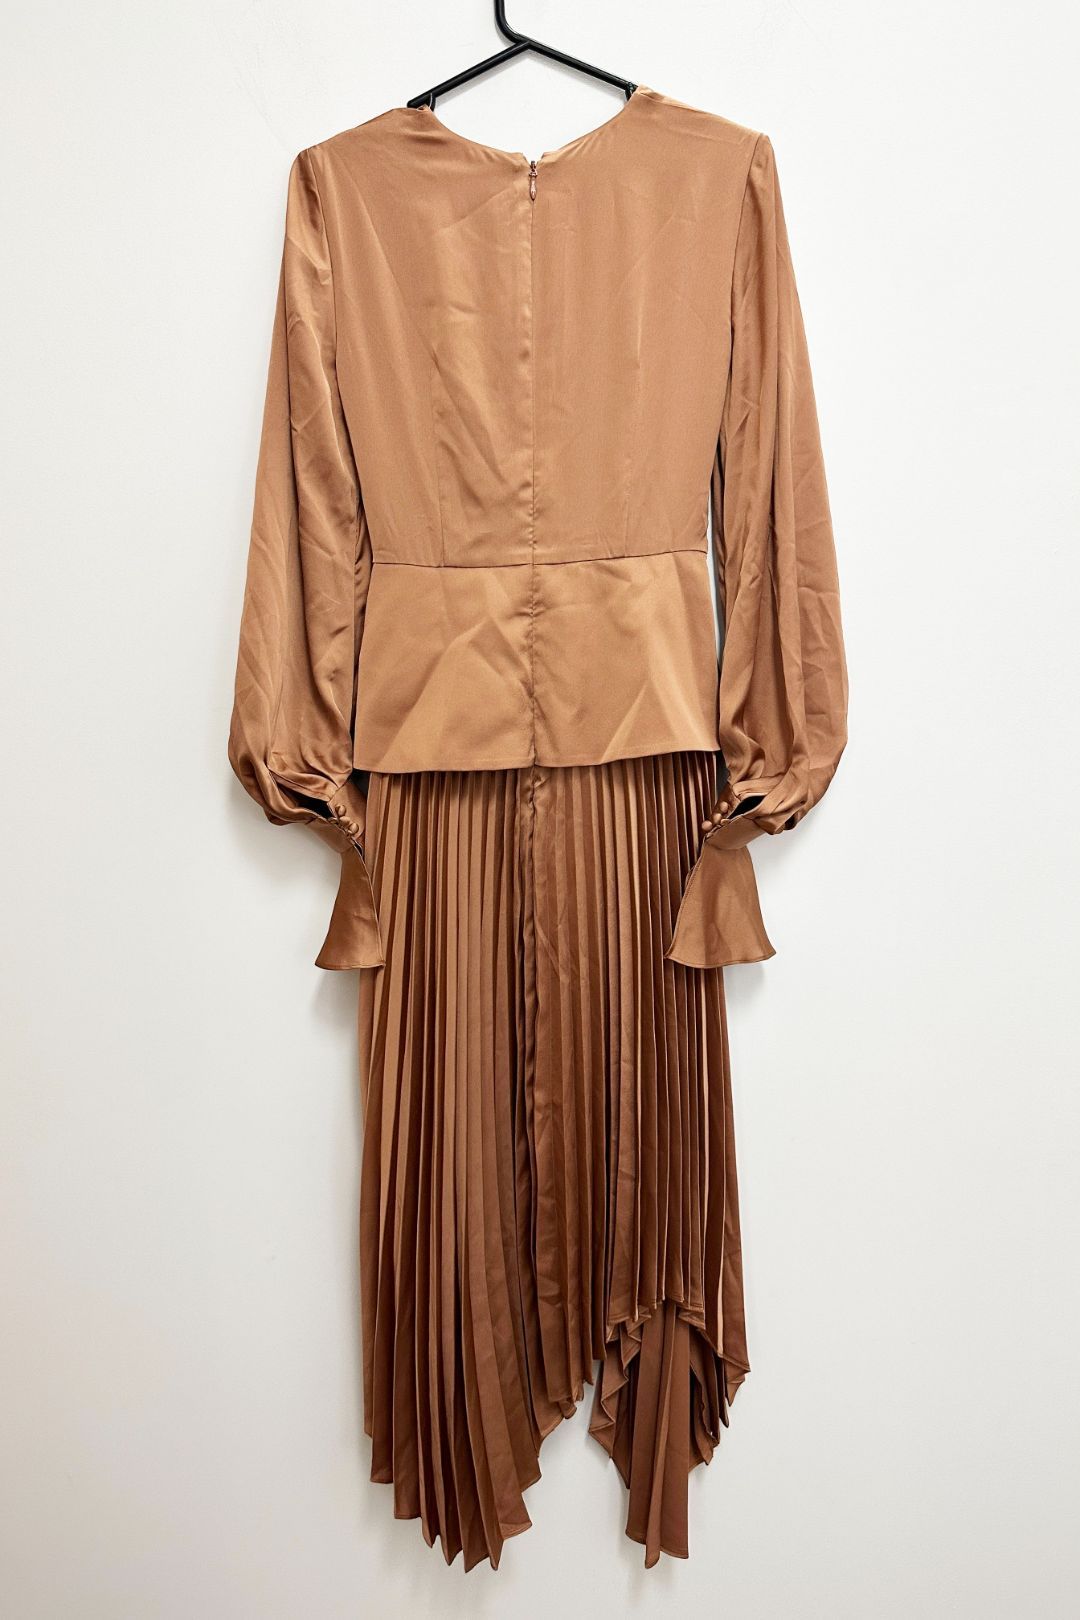 Acler Empire Pleated Maxi Dress in Brown